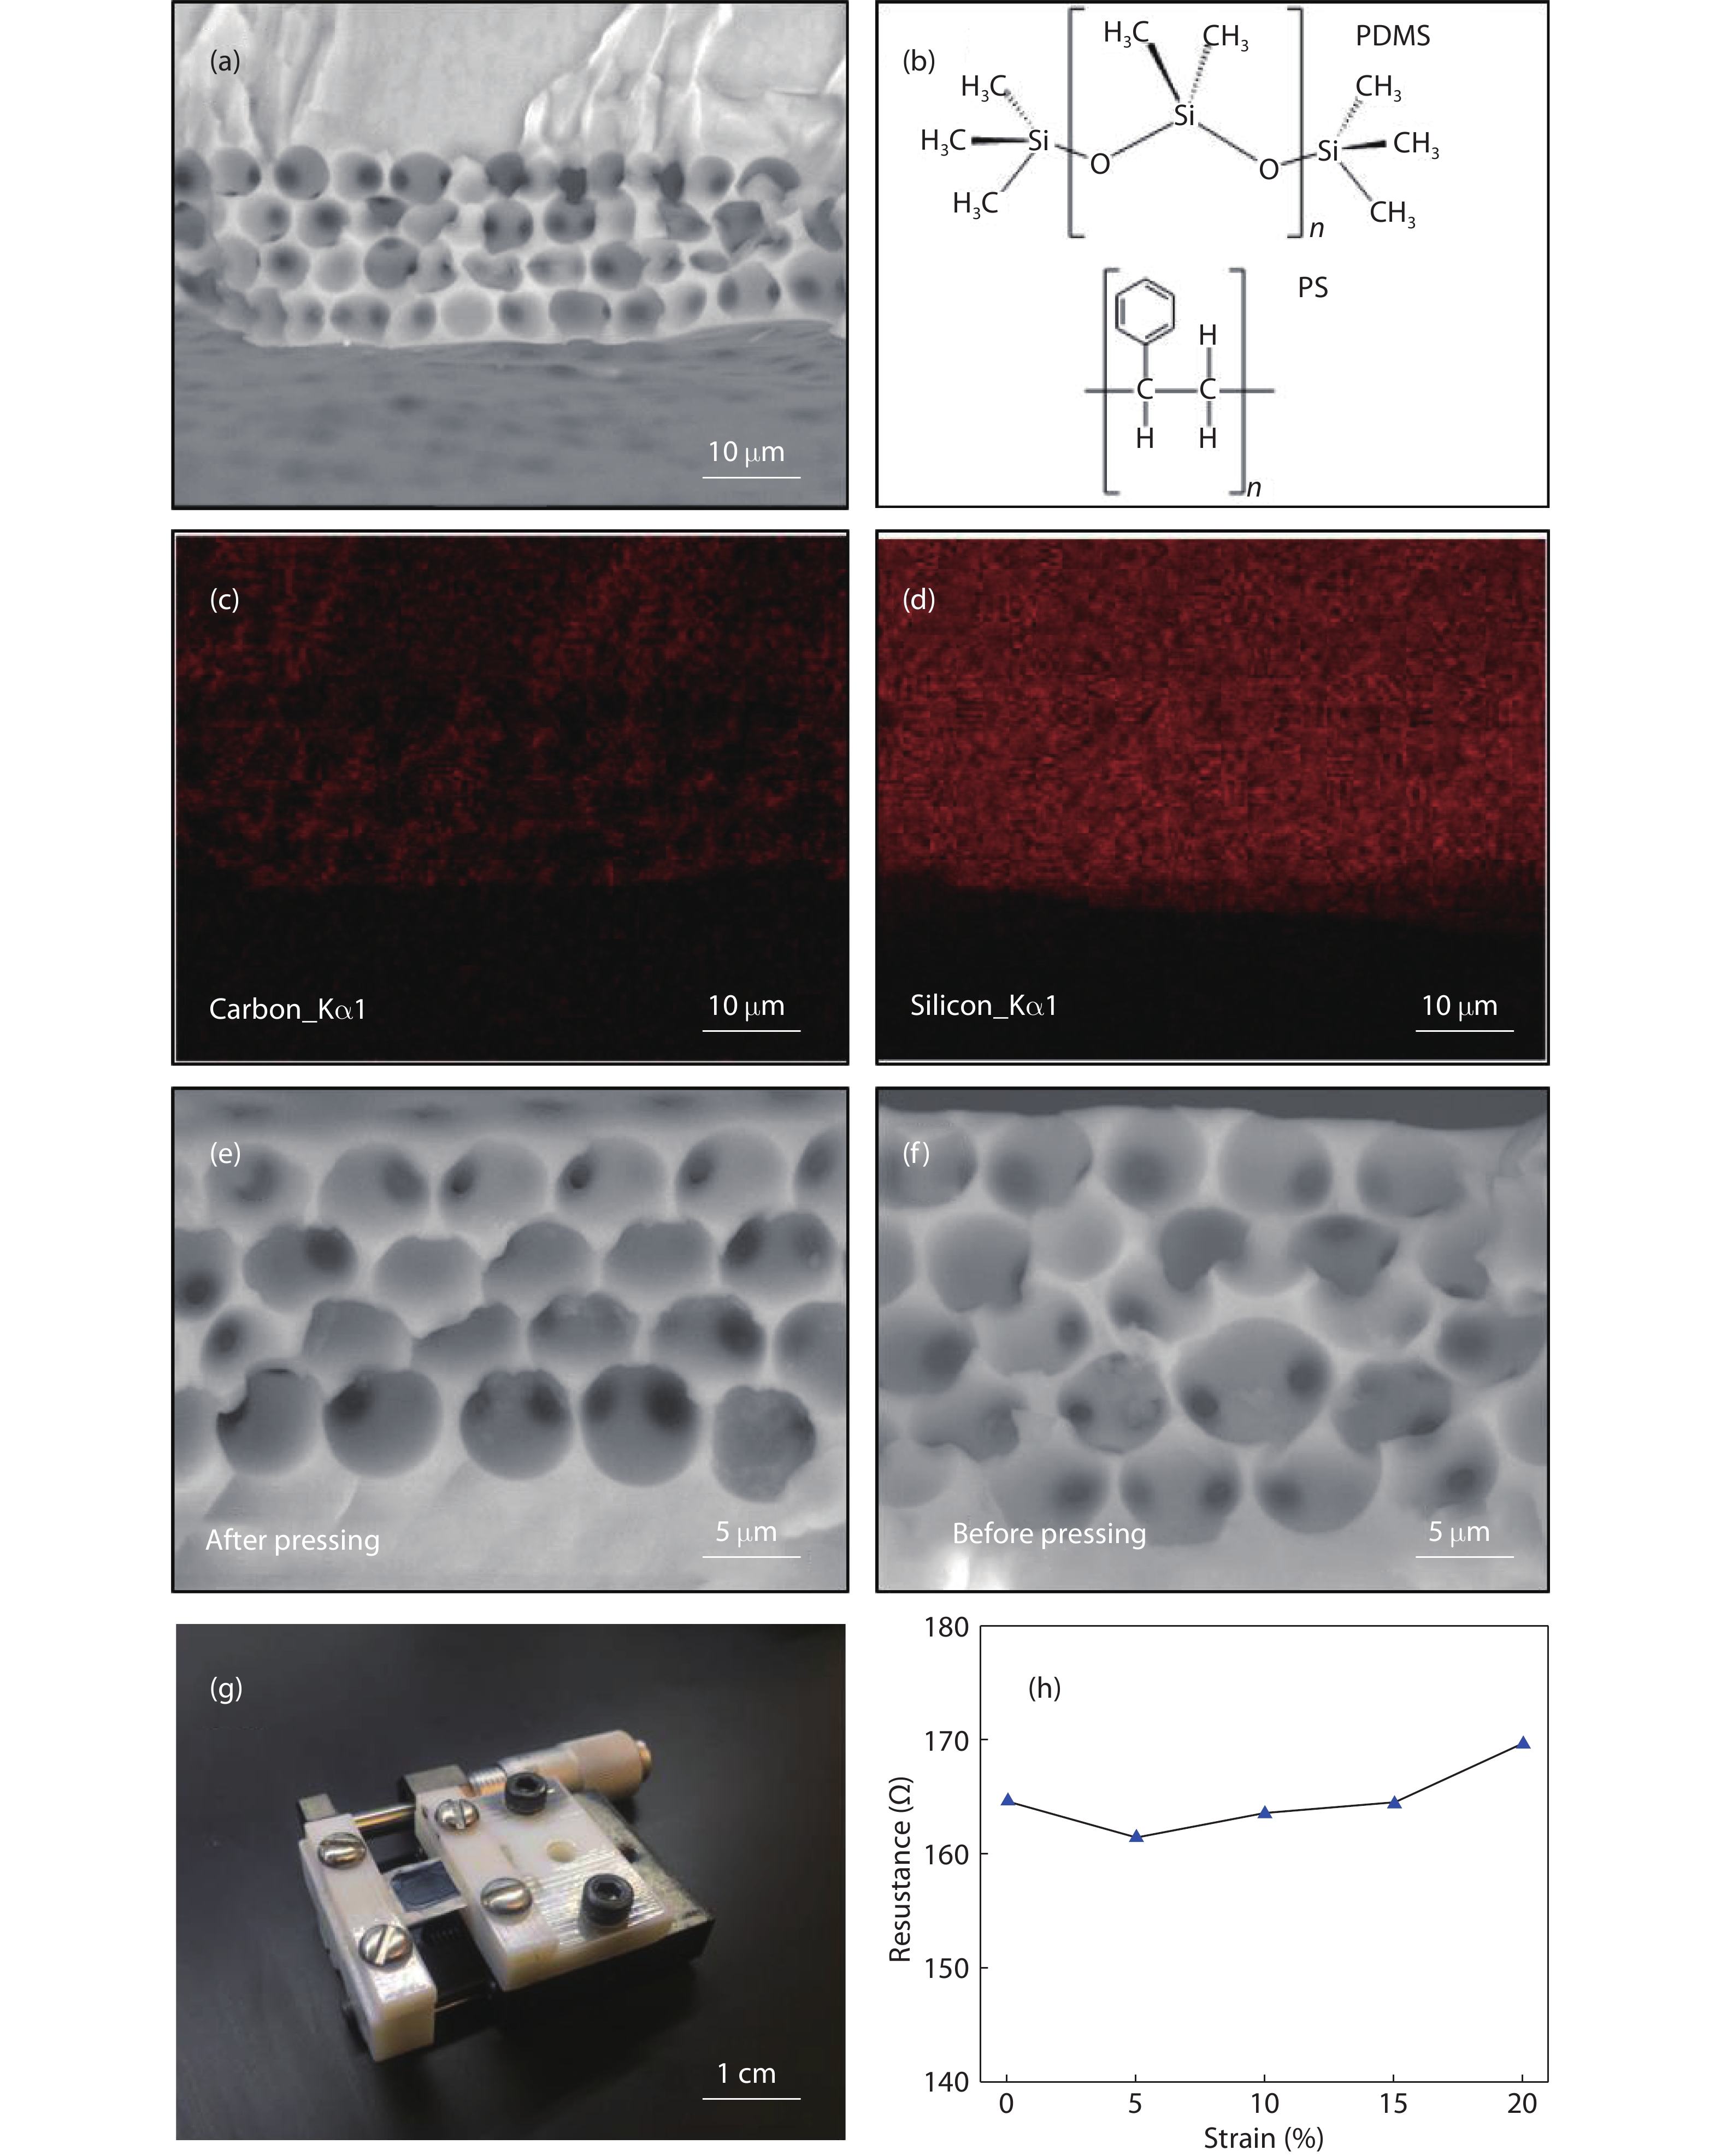 (Color online) (a) SEM image of porous PDMS structure examined in EDX (b) structural formula of polydimethylsiloxane (PDMS) and polystyrene (PS). Energy dispersive X-ray analysis (EDX) images of (c) carbon element and (d) silicon element of porous PDMS structure. SEM images of porous PDMS structure (e) after compressive pressure (f) before compressive pressure. (g) Photograph of the stretching test setup. (h) Resistance change of the screen-printed PEDOT:PSS electrode under various levels of applied strain.